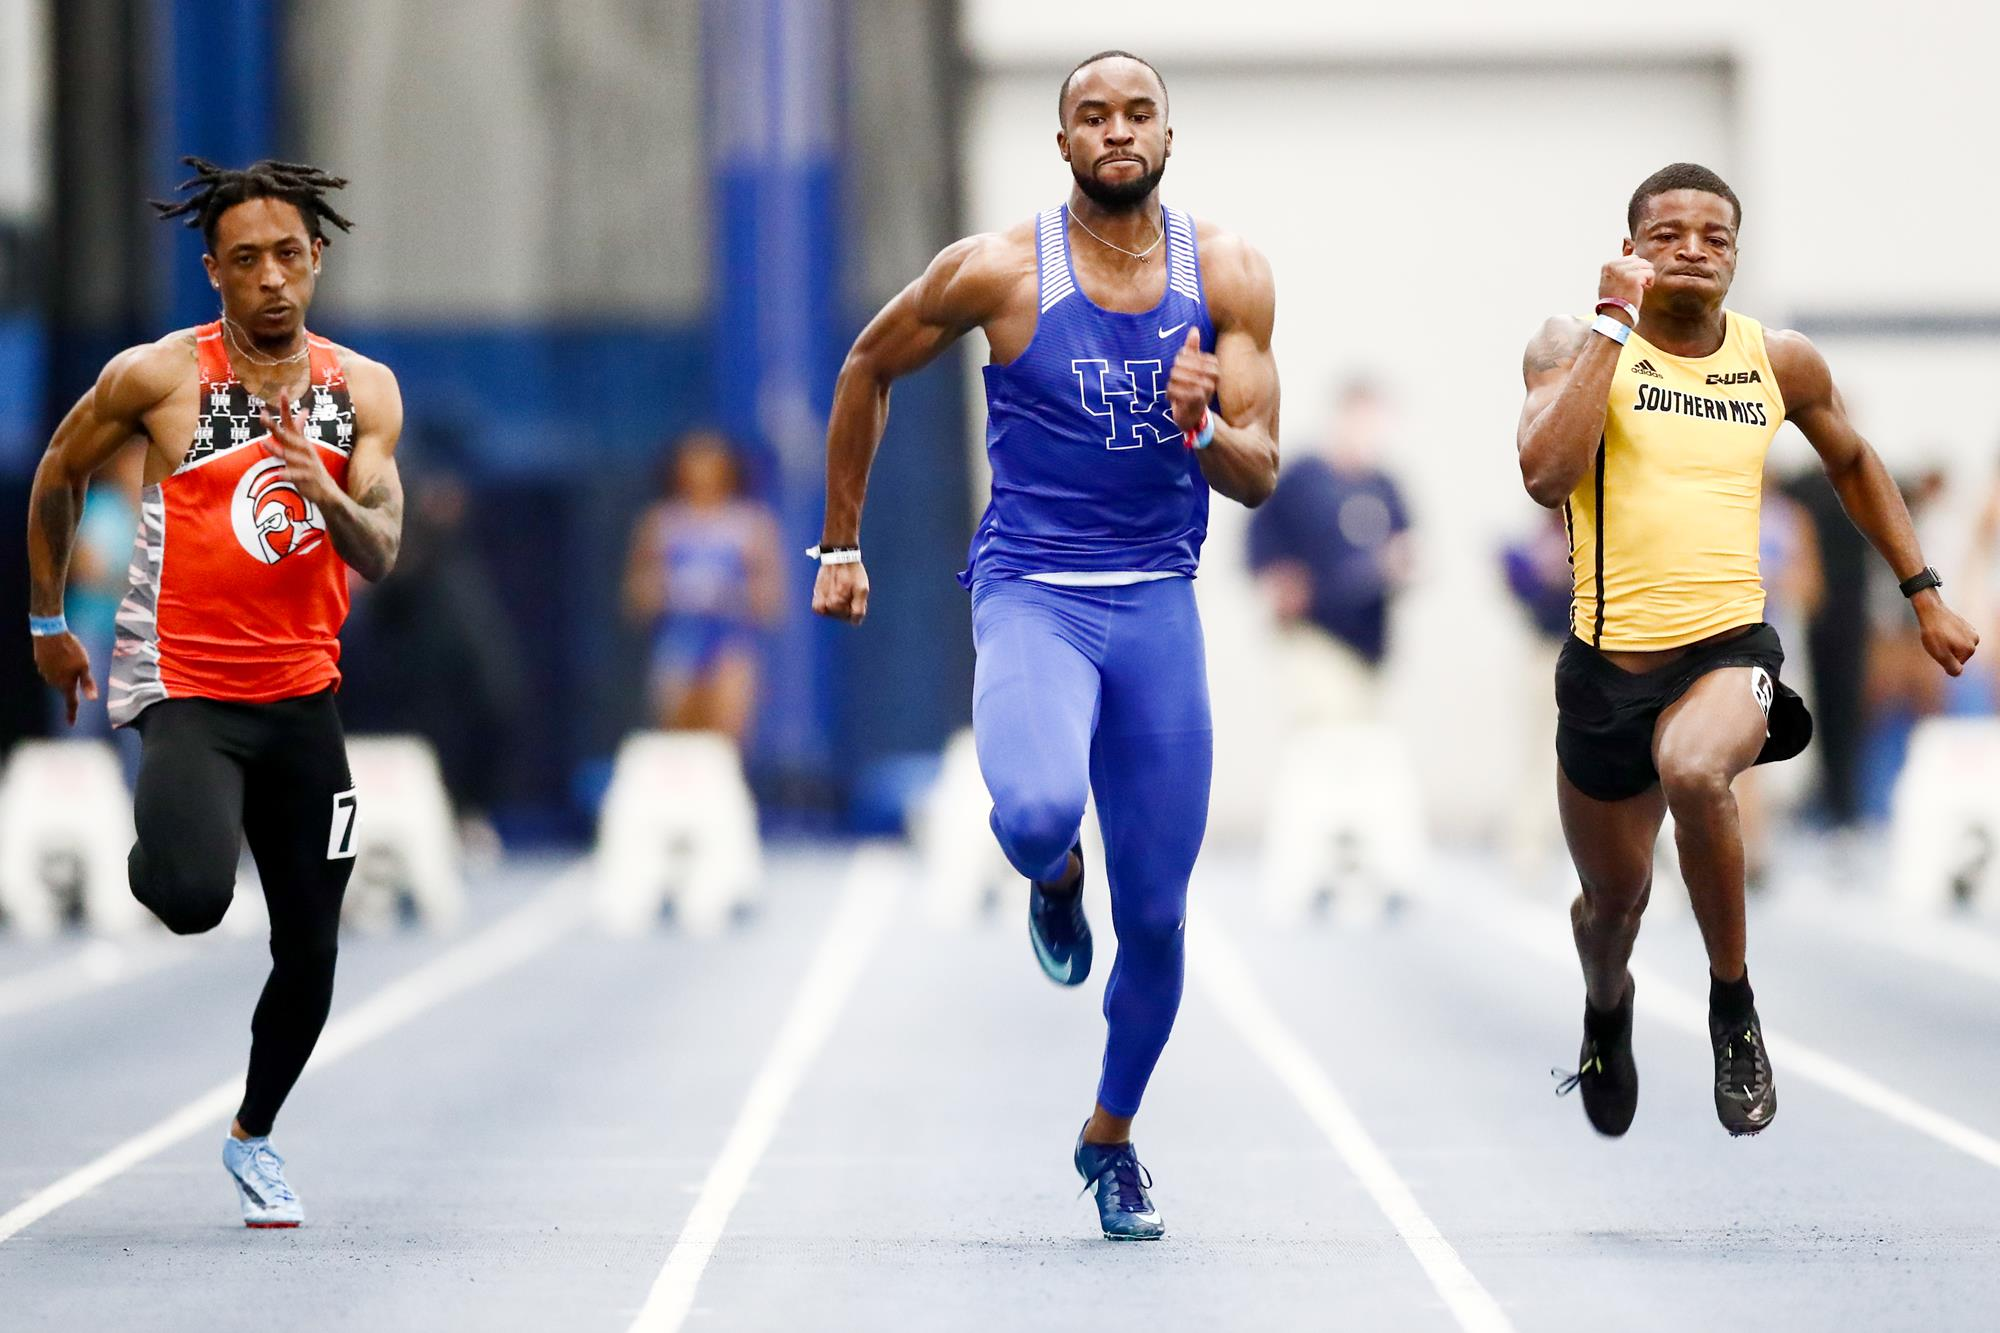 UKTF Finishes 2019 Edition of the McCravy with Nine Event Wins